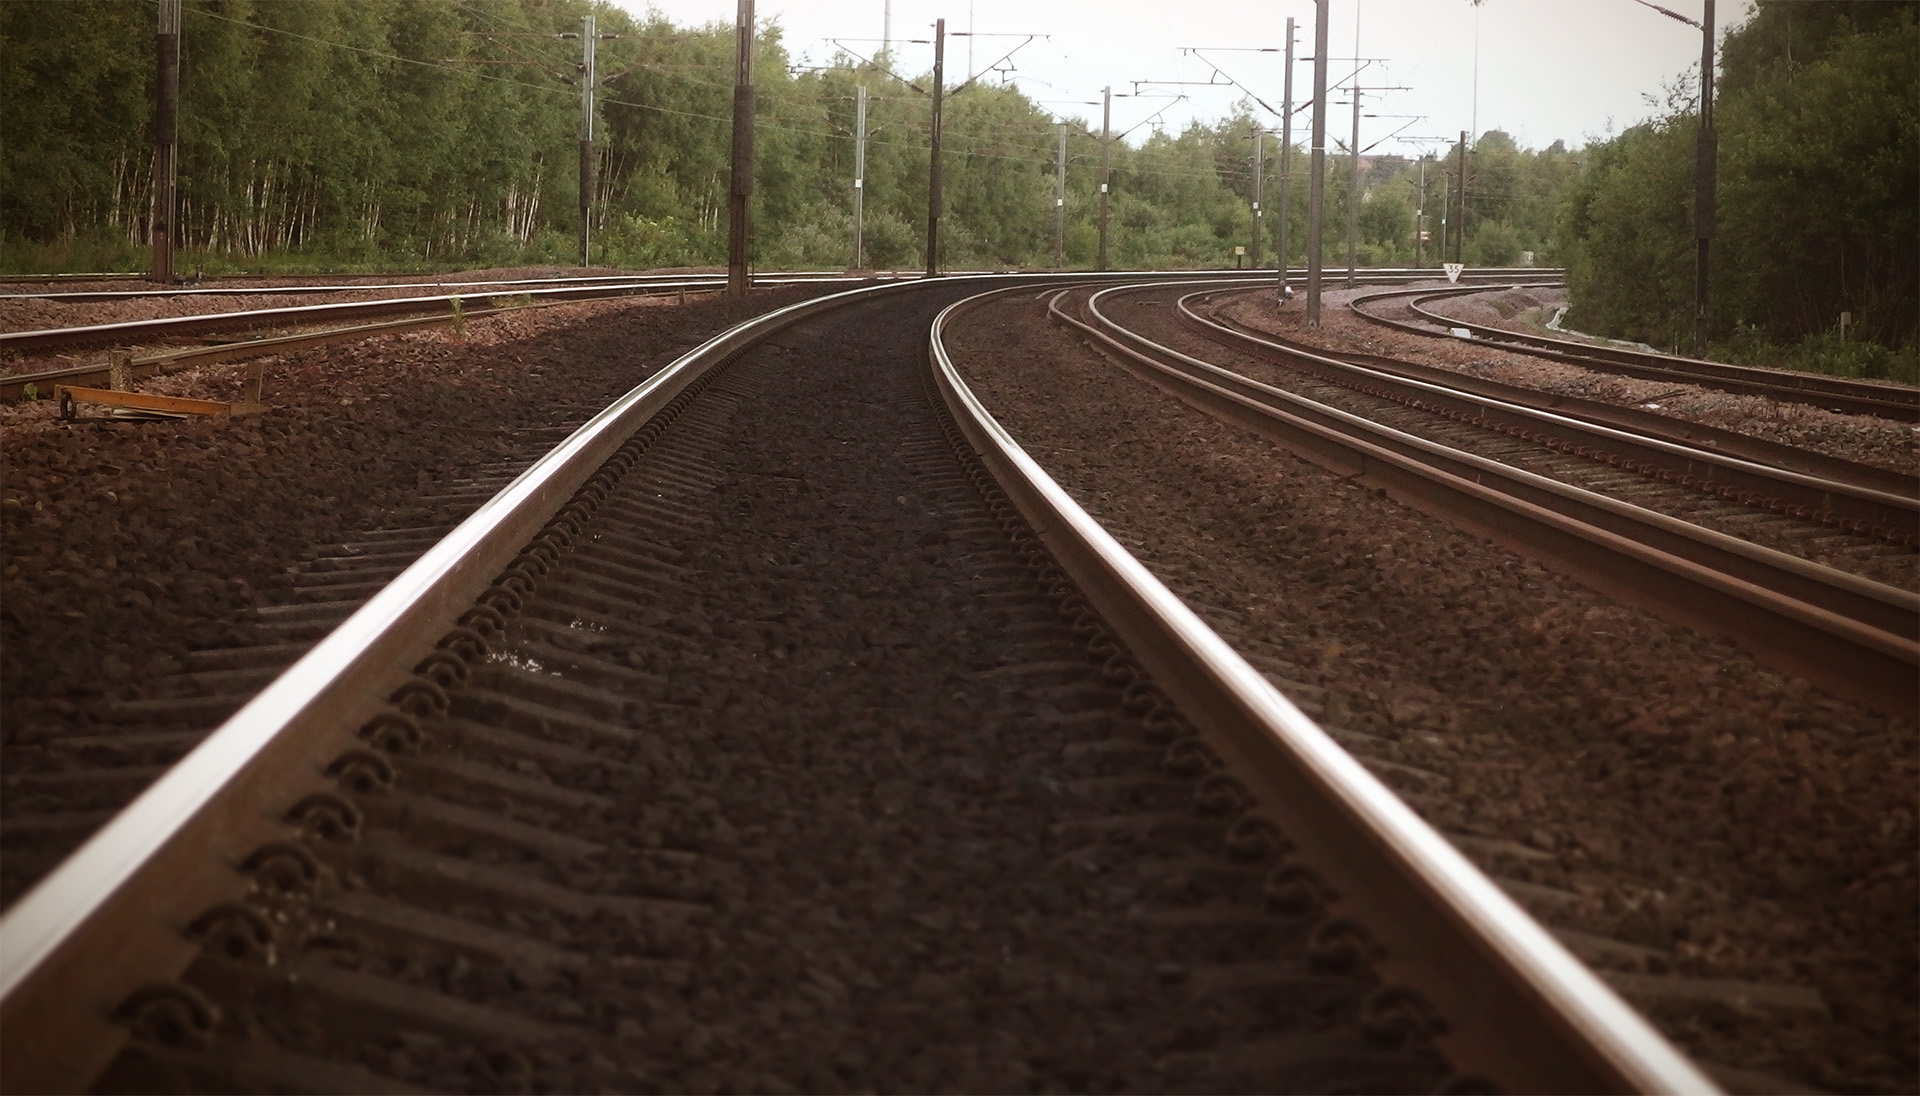 Canted track on the Fast lines south of Doncaster